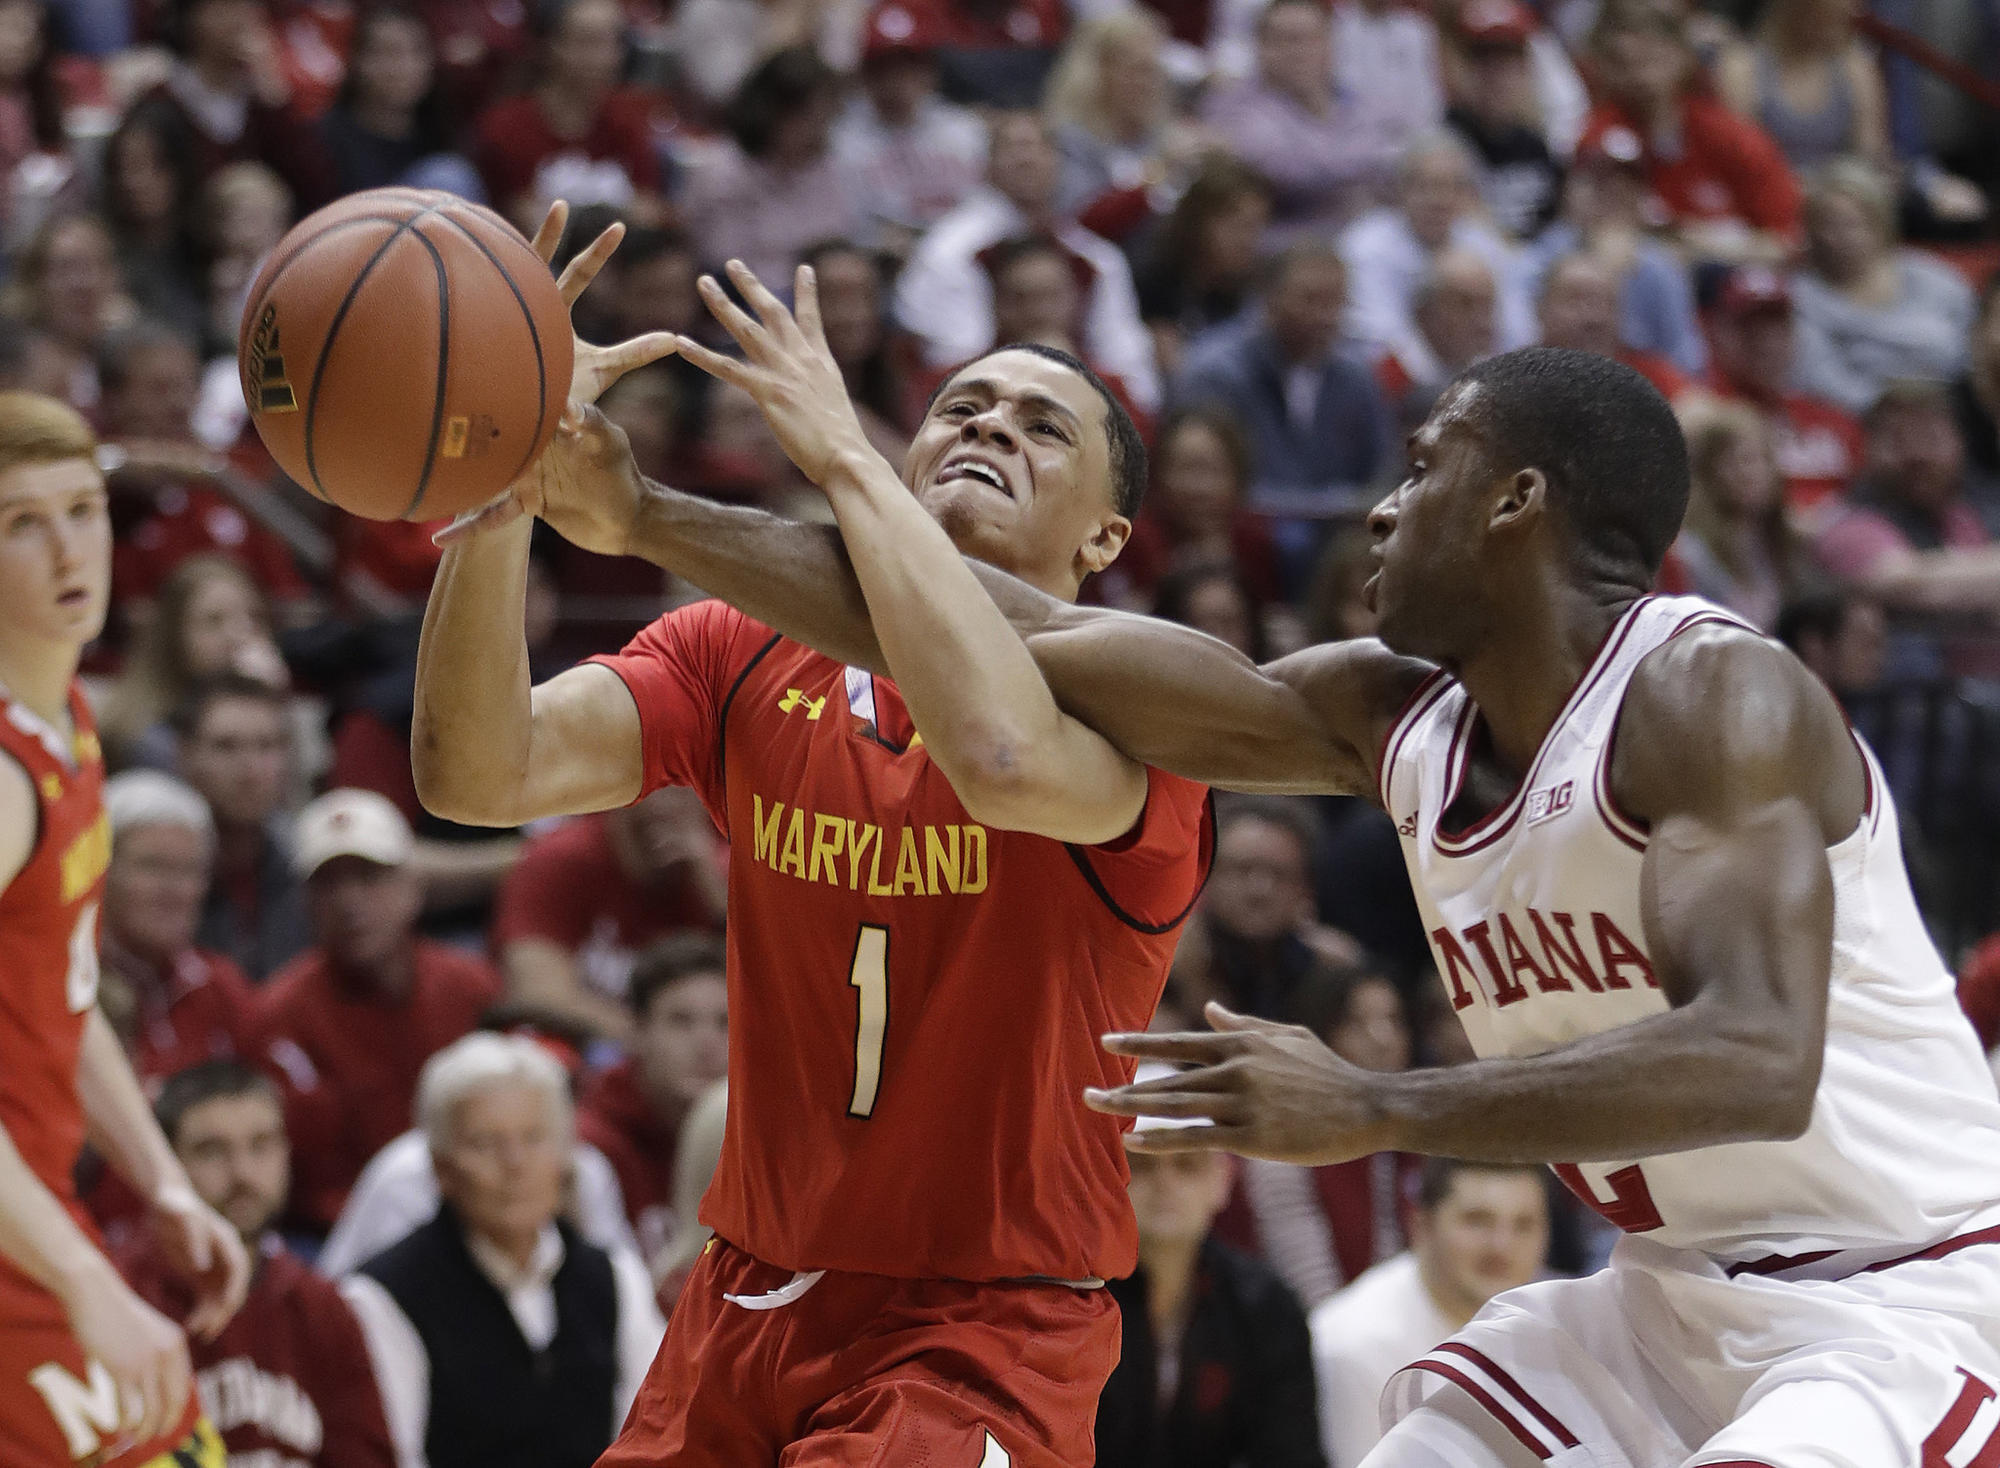 Maryland loses to Indiana, 71-68, and sees Fernando go out with another ankle injury